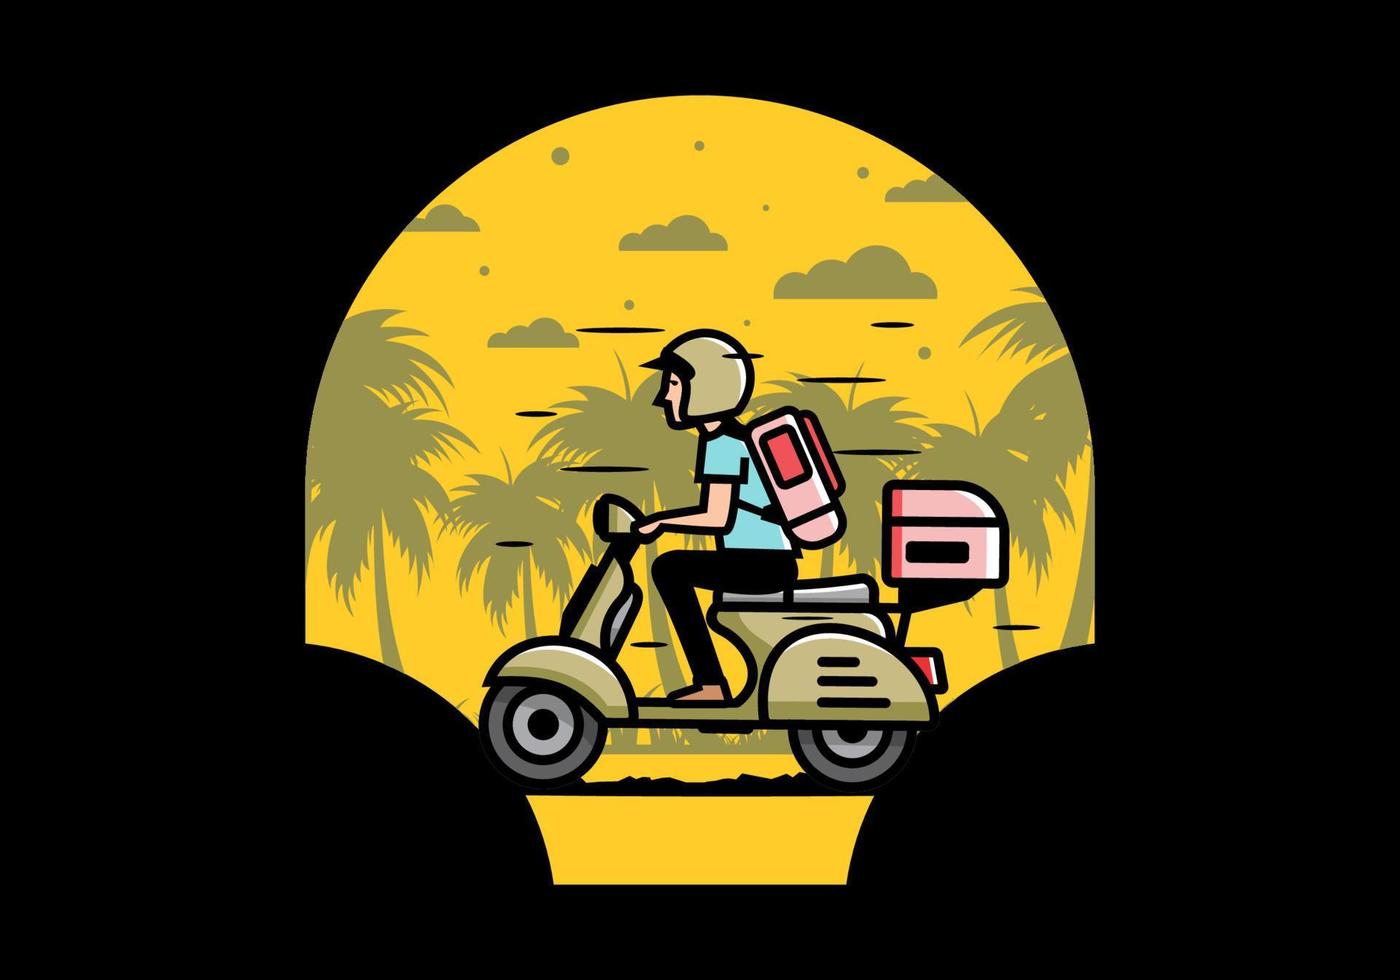 Man goes on vacation riding scooter illustration vector